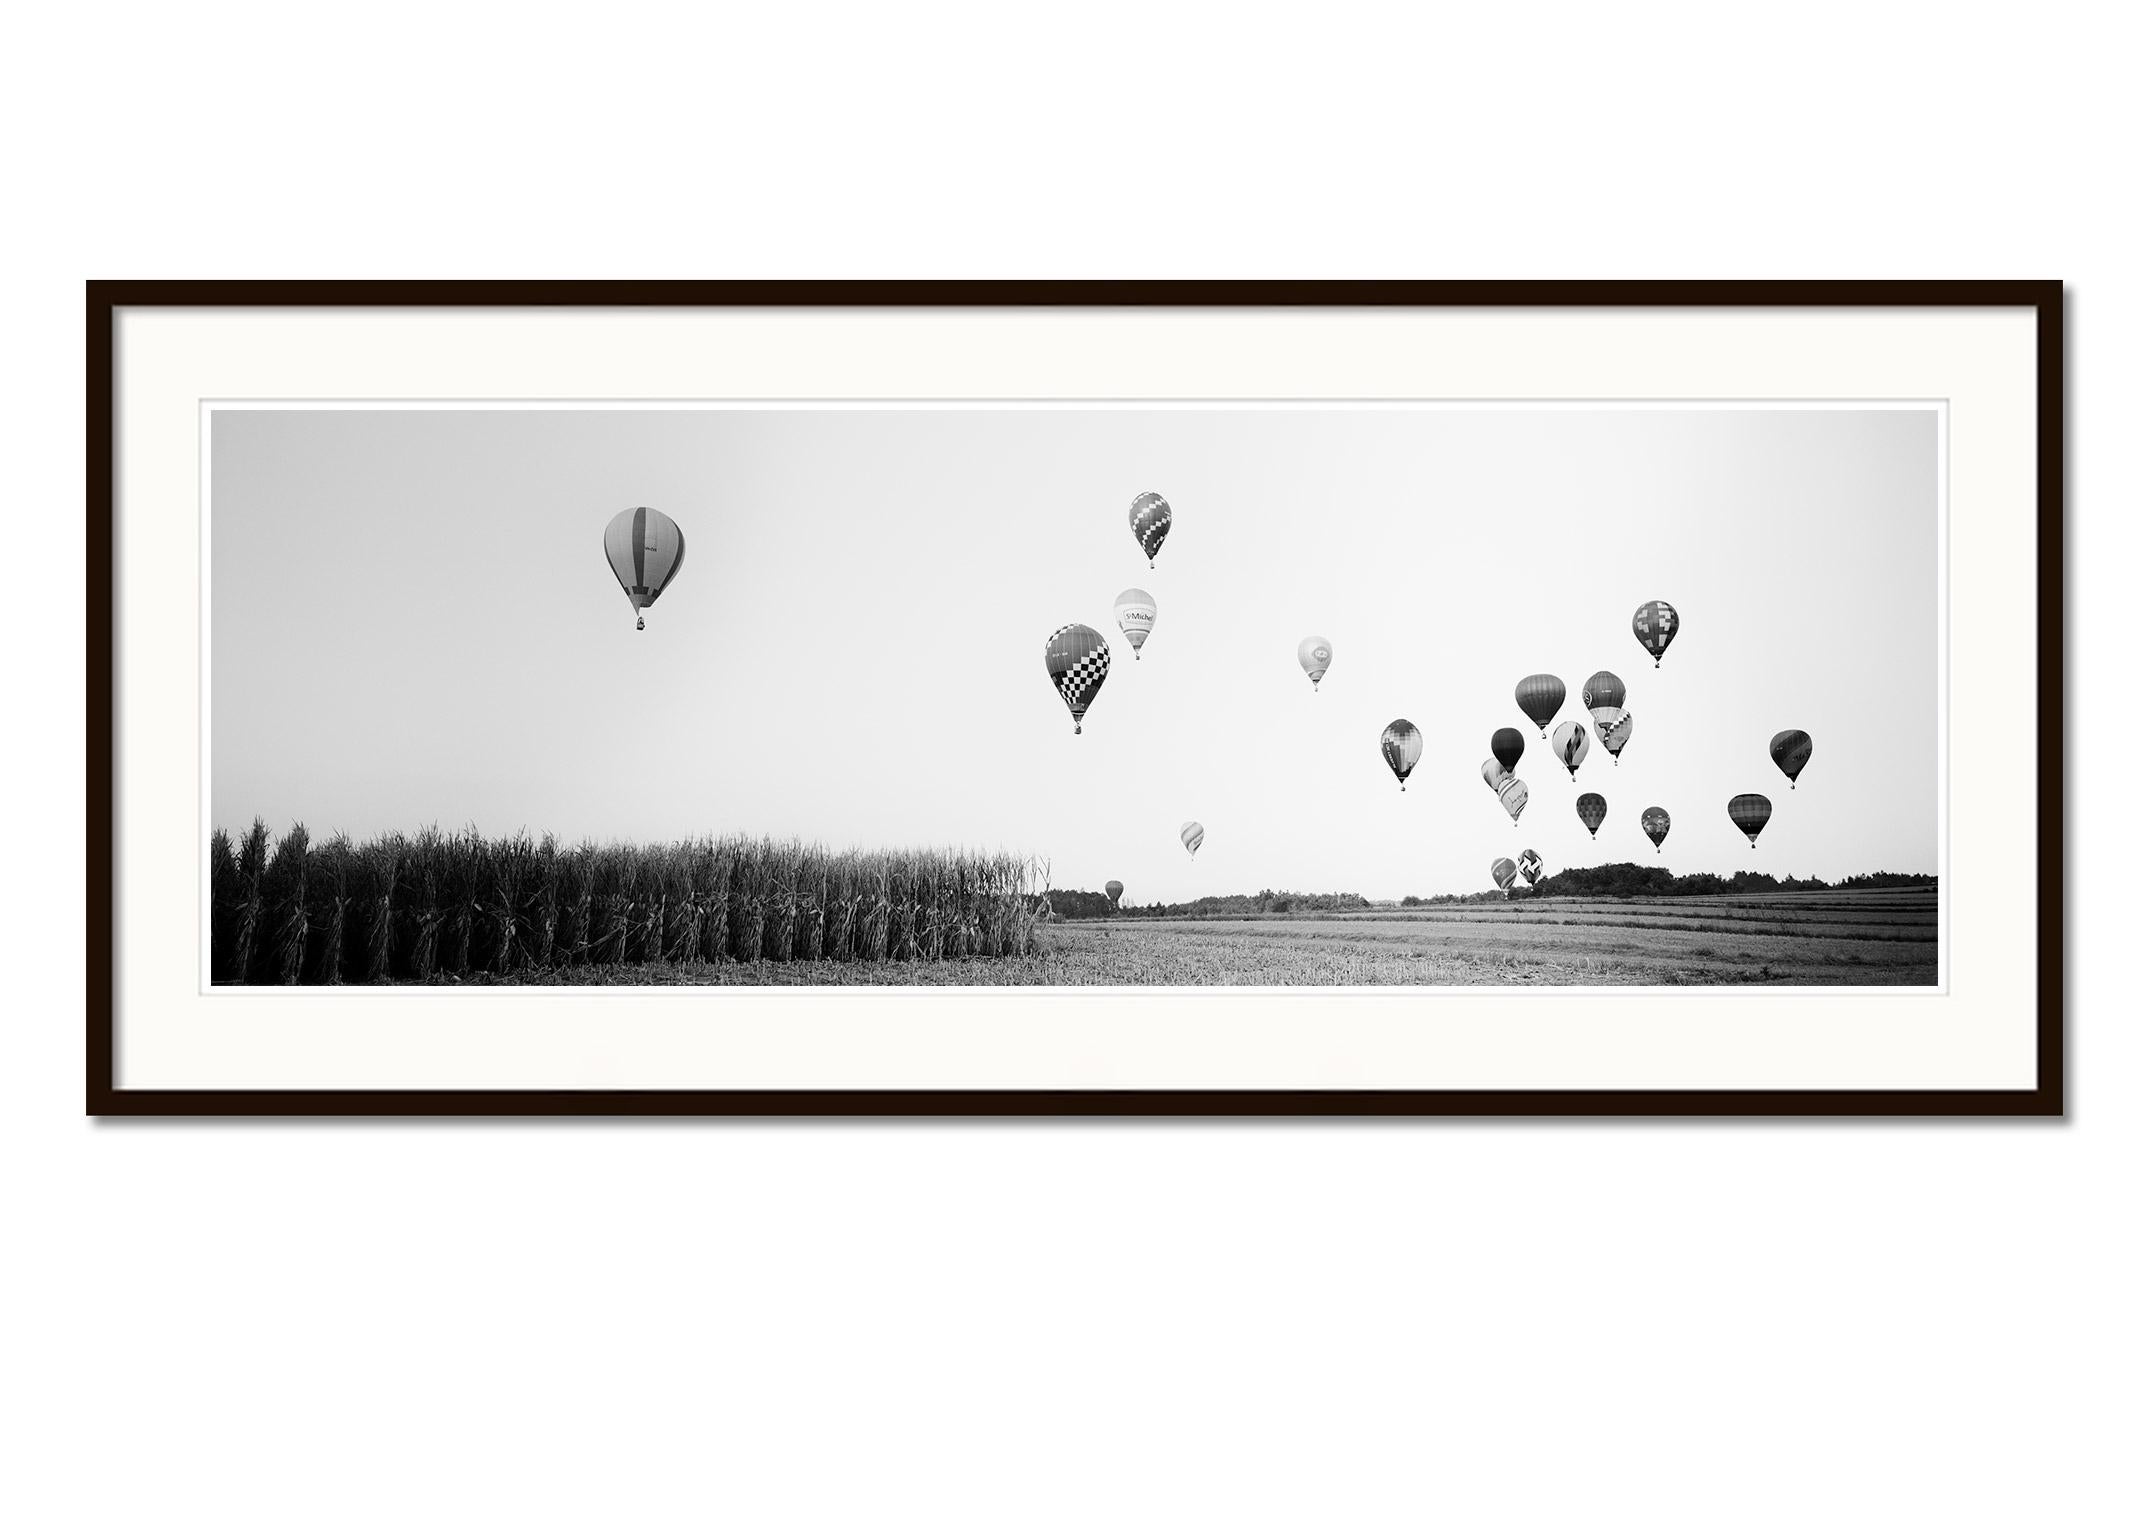 Hot Air Balloon Panorama, Championship, black and white photography, landscape - Gray Landscape Photograph by Gerald Berghammer